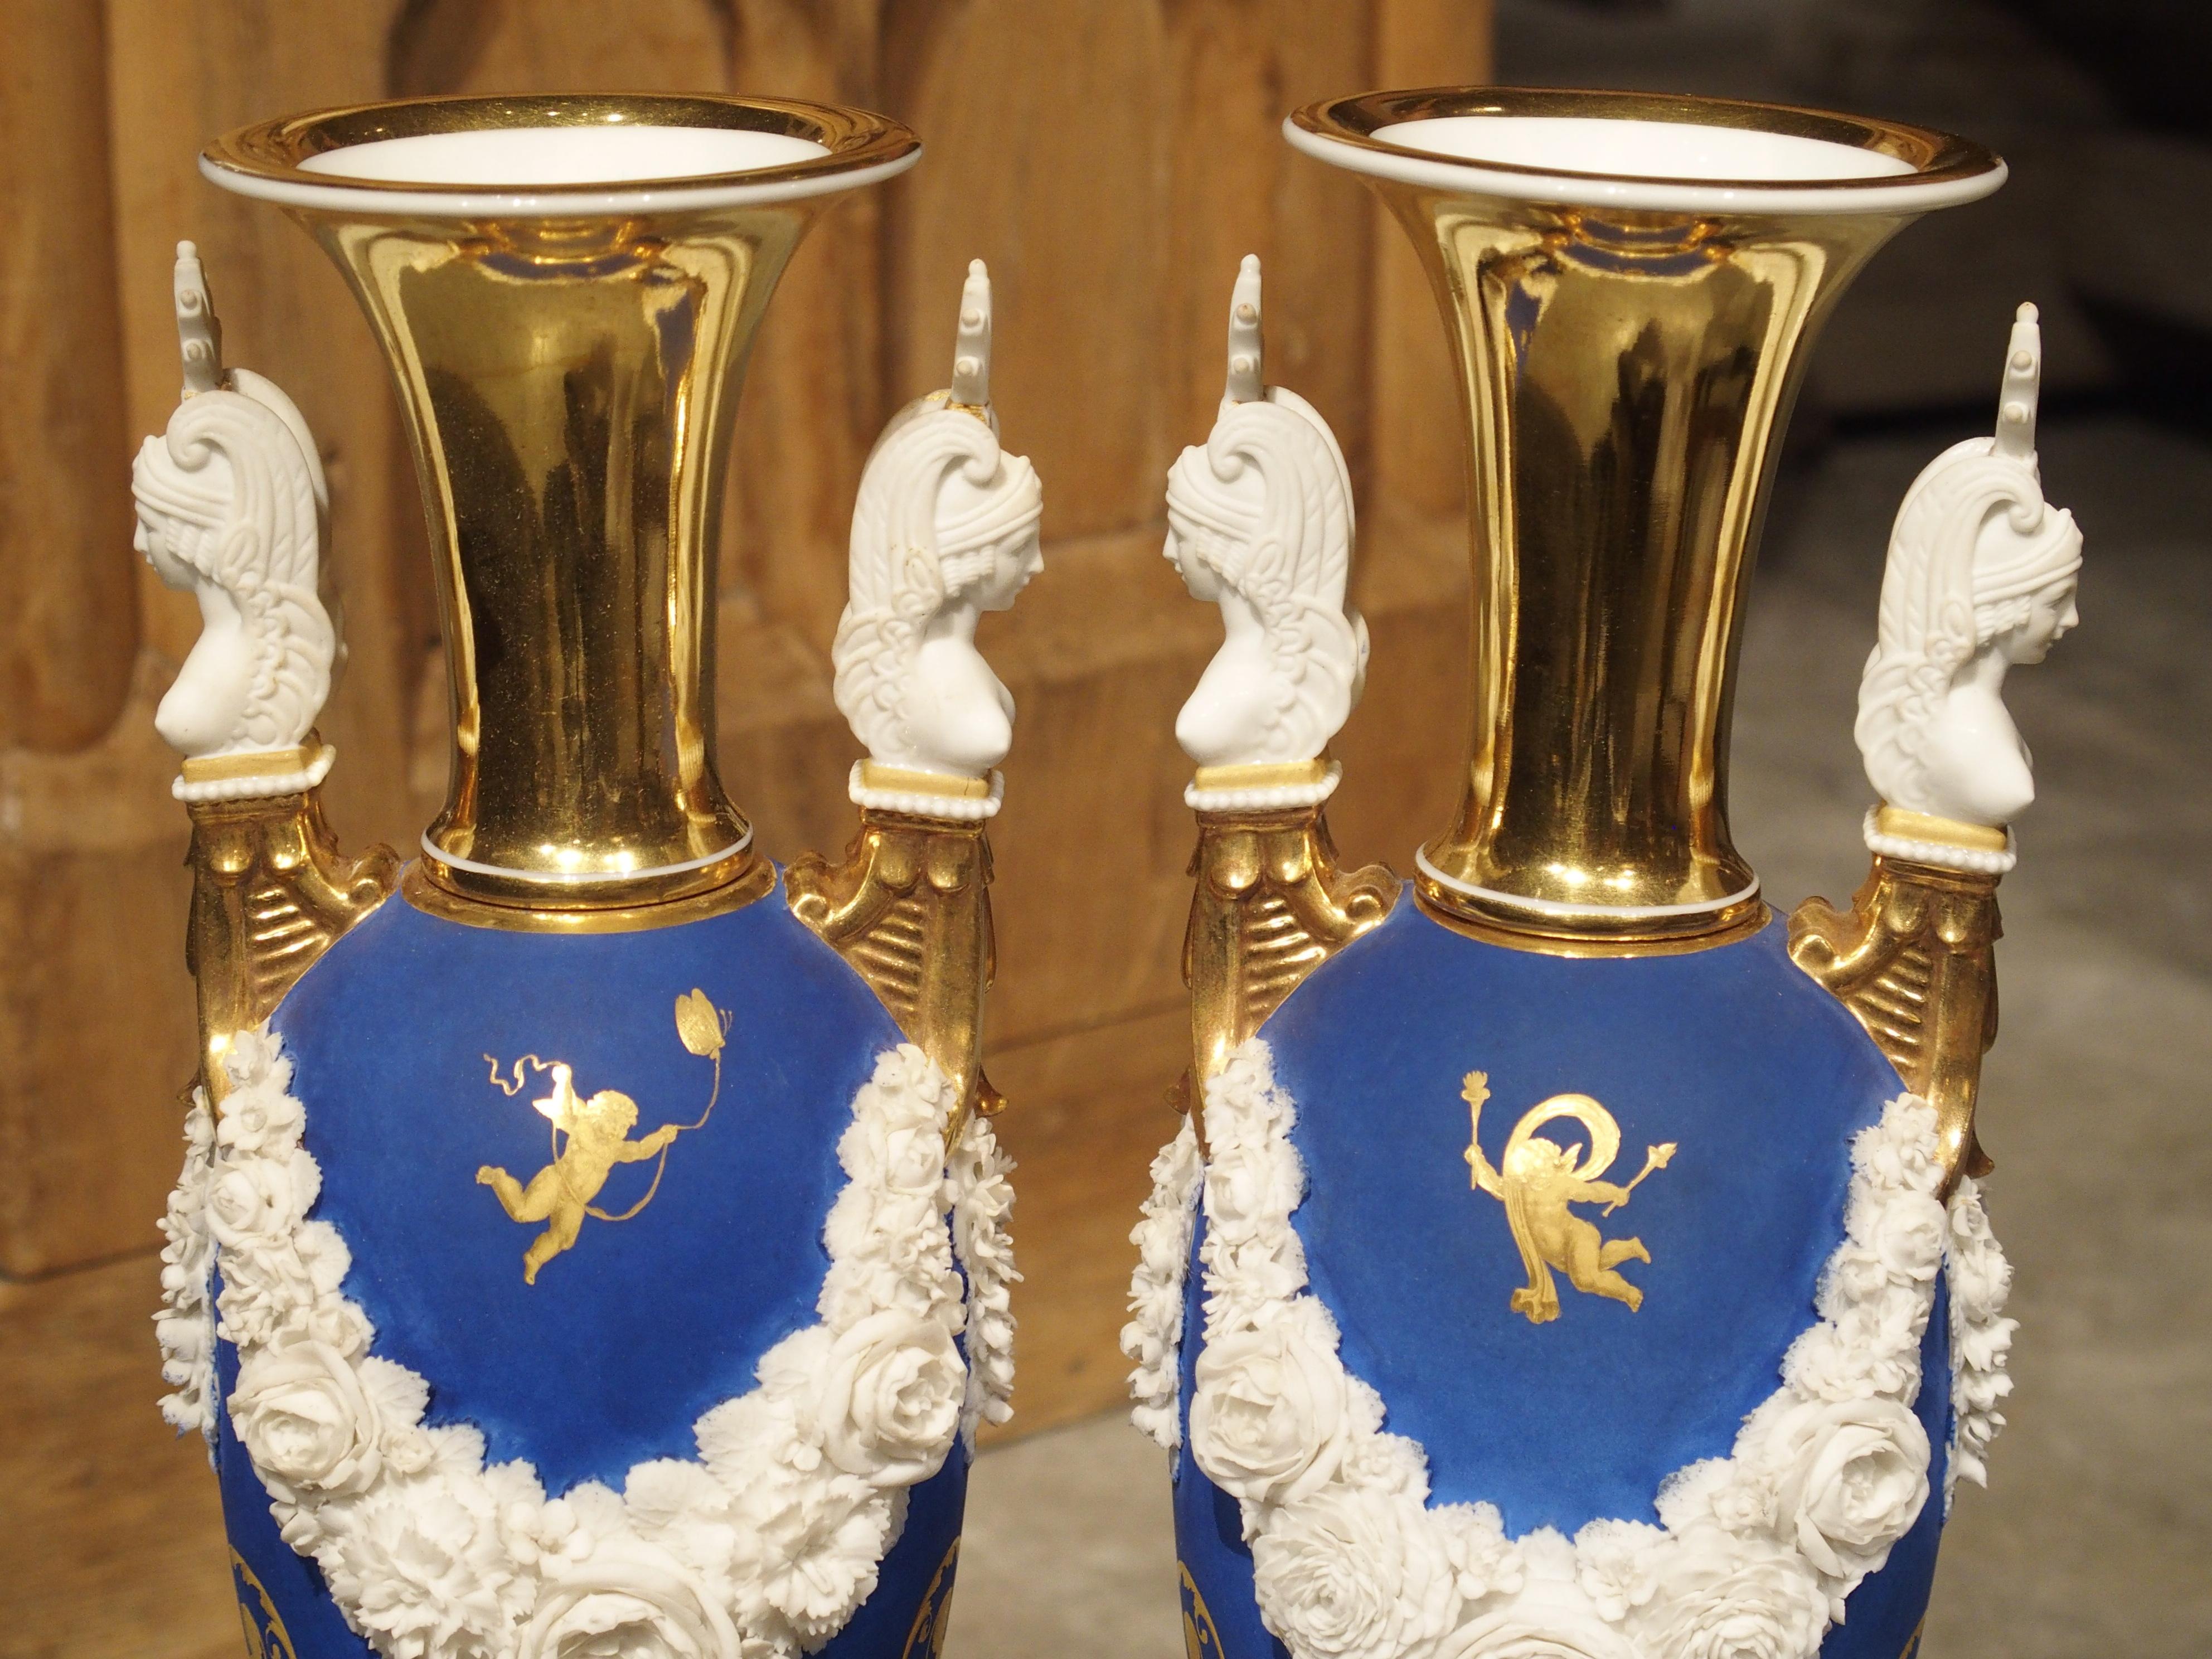 Pair of Neoclassical Paris Porcelain Vases in Royal French Blue, Early 1800s For Sale 11